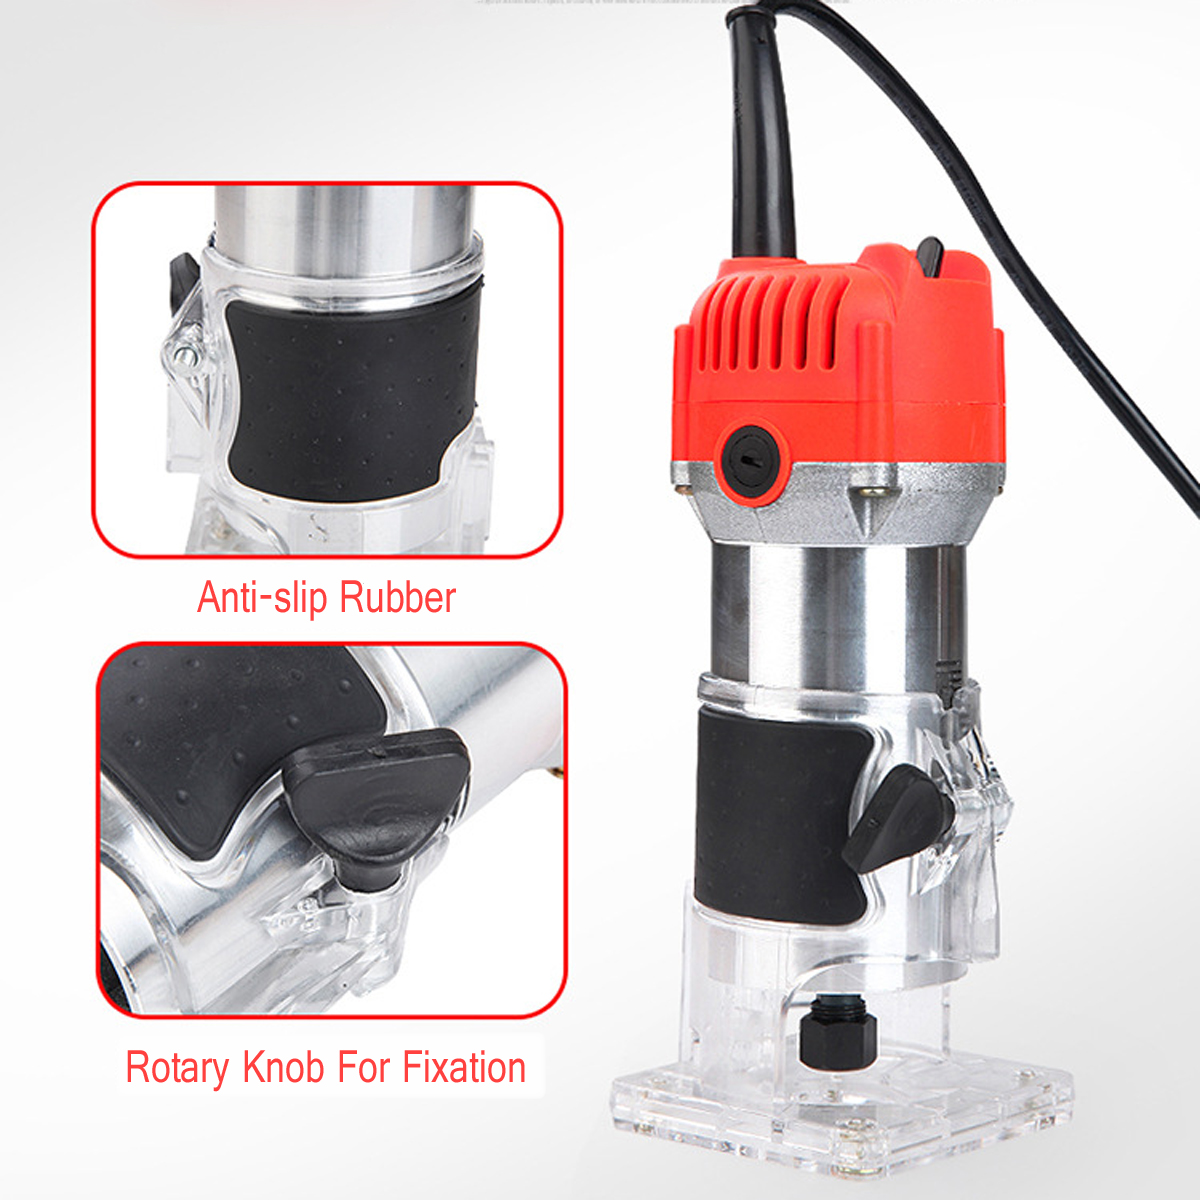 Raitooltrade-220V-680W-30000RPM-Wood-Corded-Electric-Hand-Trimmer-DIY-Tool-Router-635MM-1270211-6